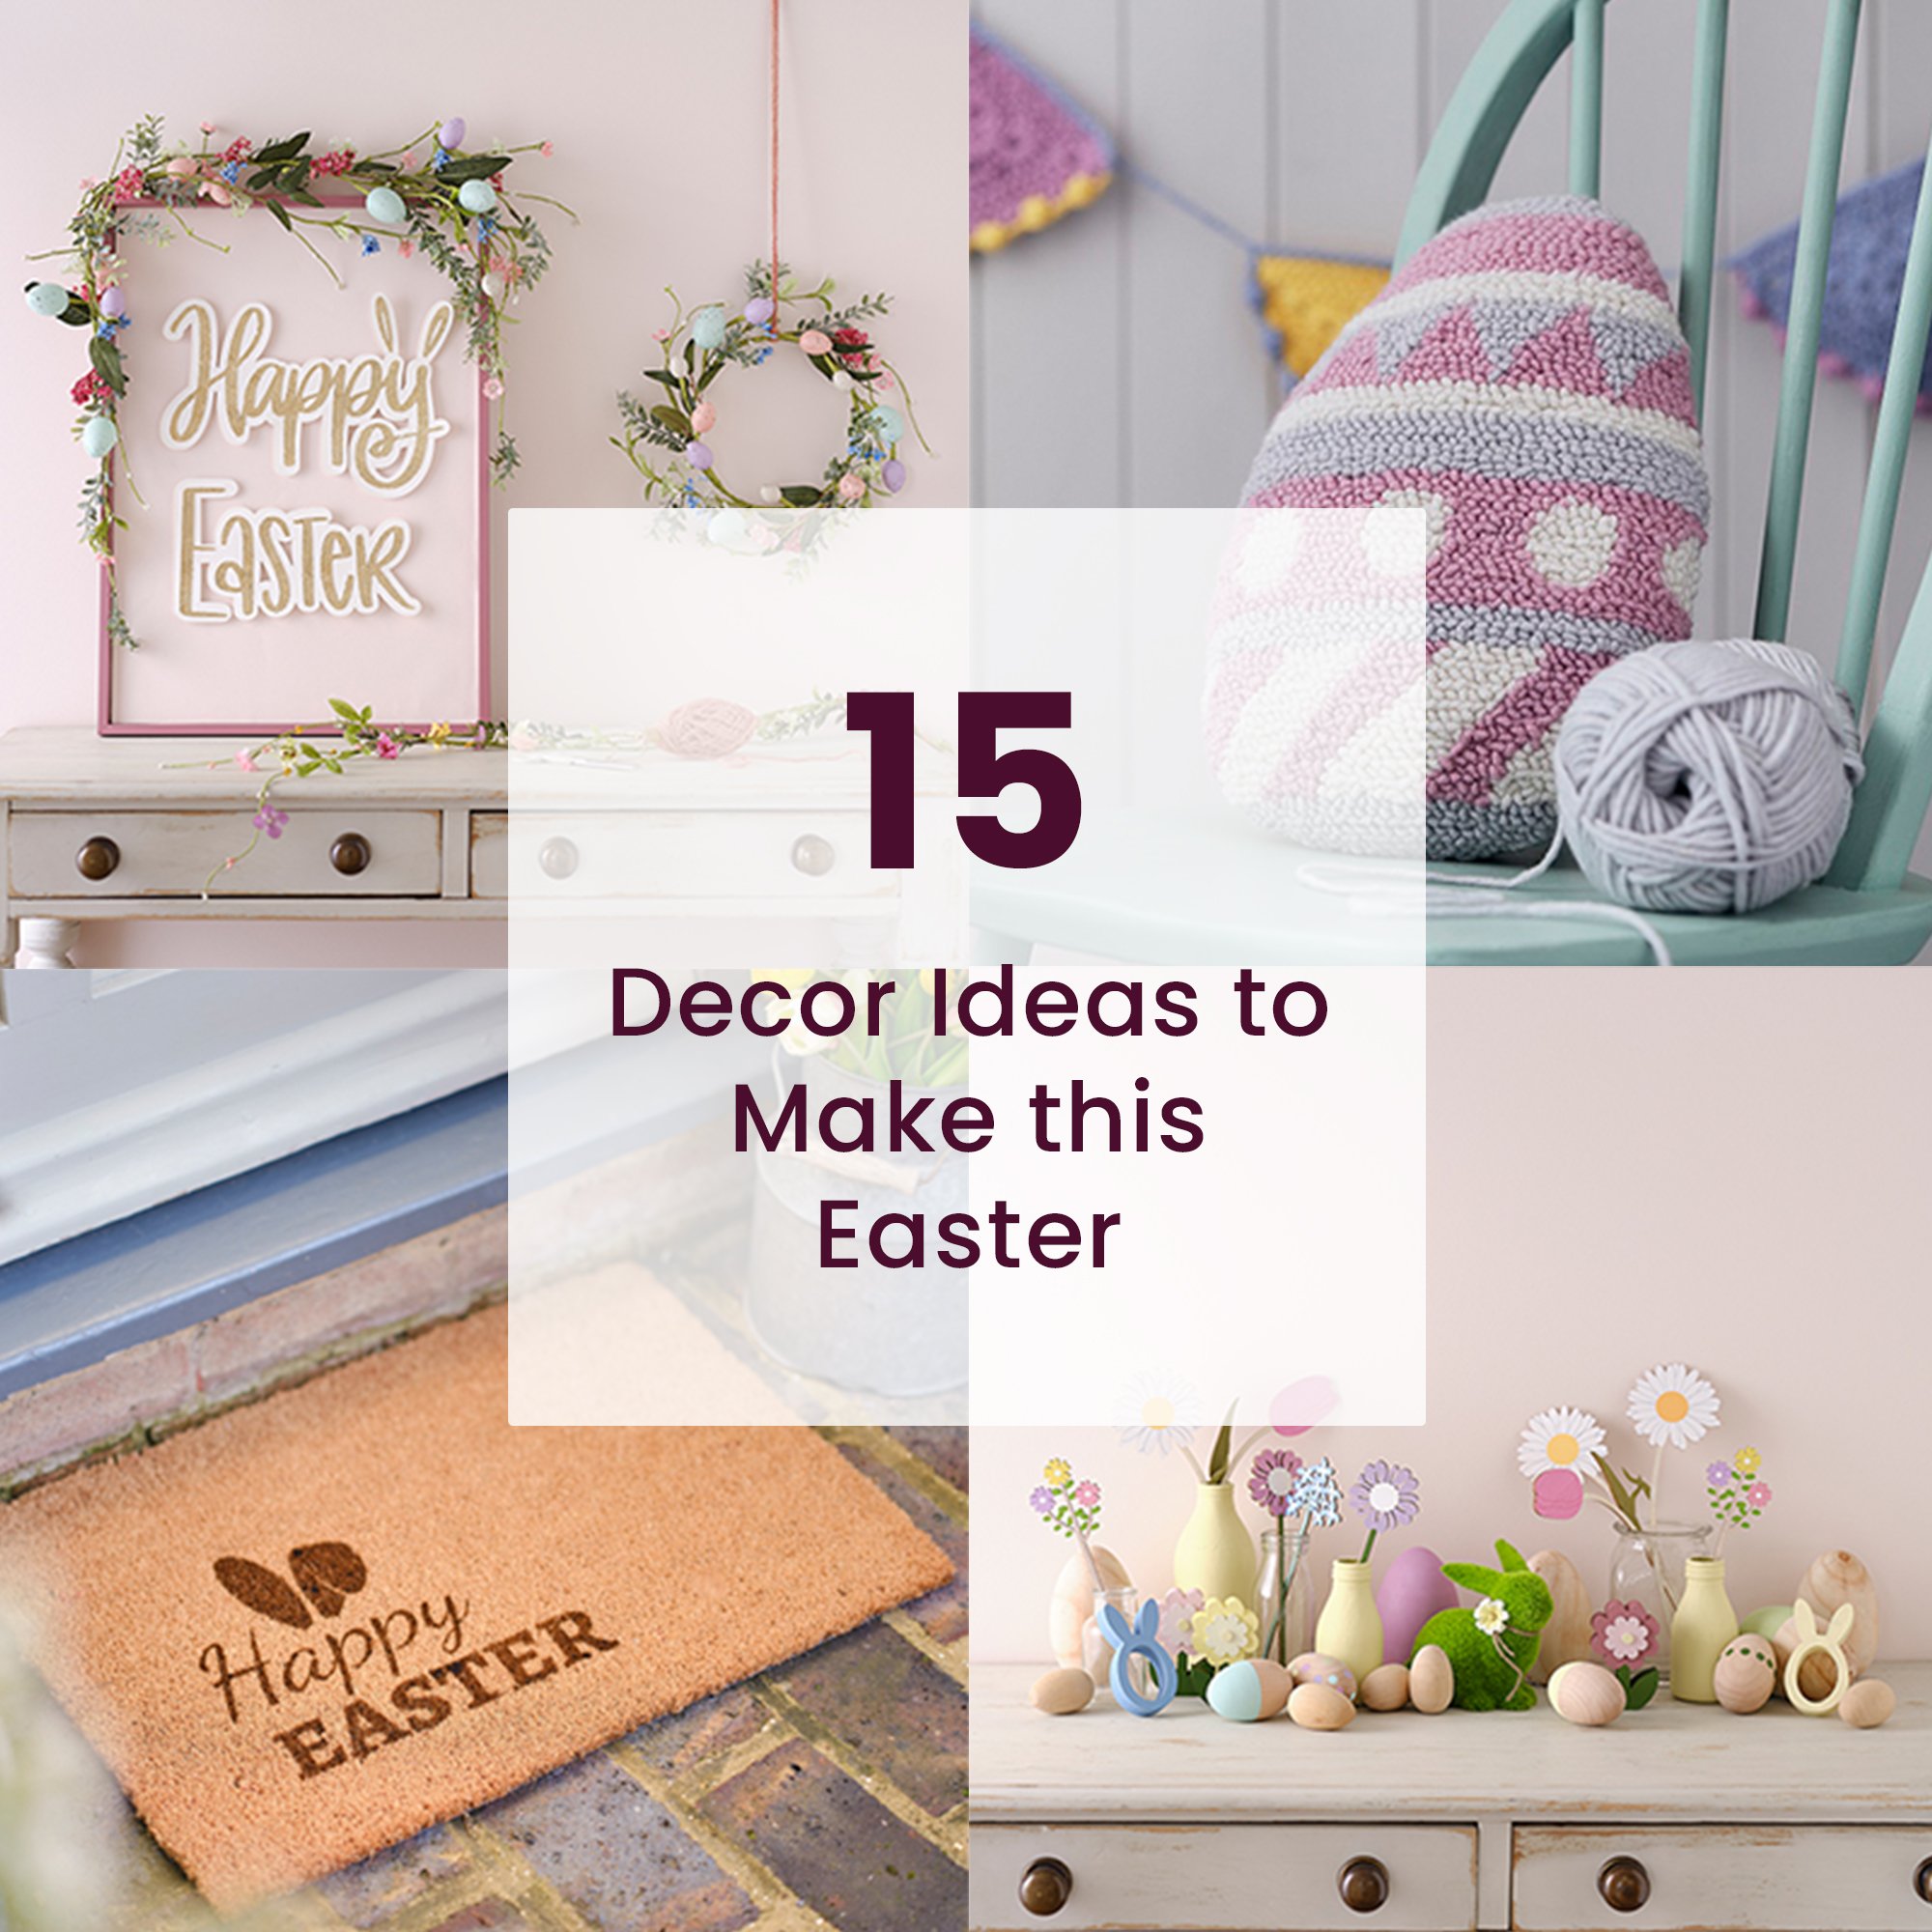 15 Décor Ideas to Make this Easter | Hobbycraft